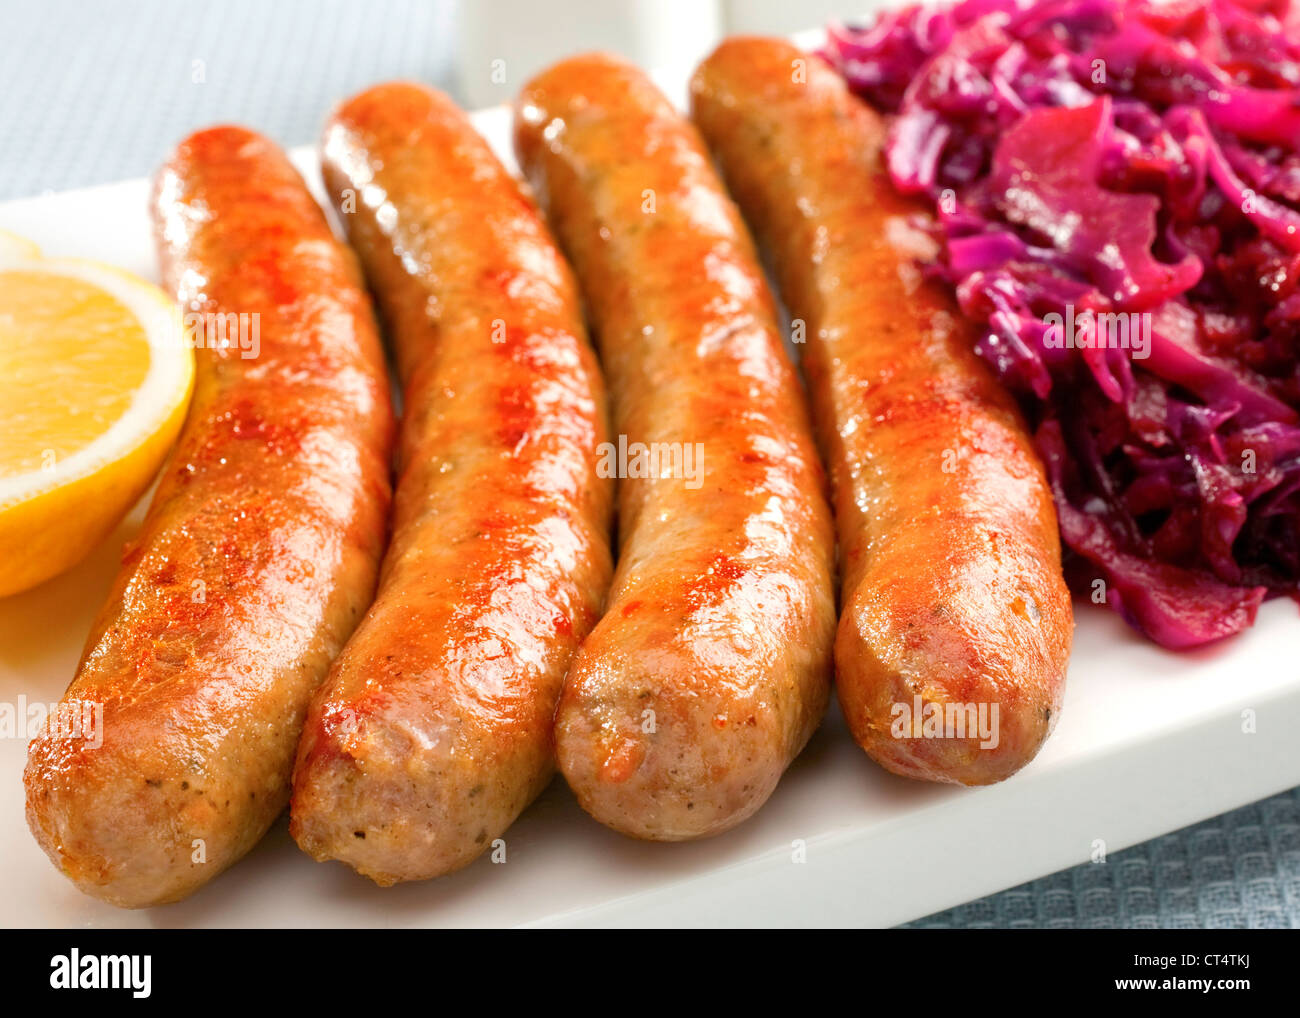 A platter with German Thuringer sausage or bratwurst, with spiced red cabbage and lemon. Stock Photo